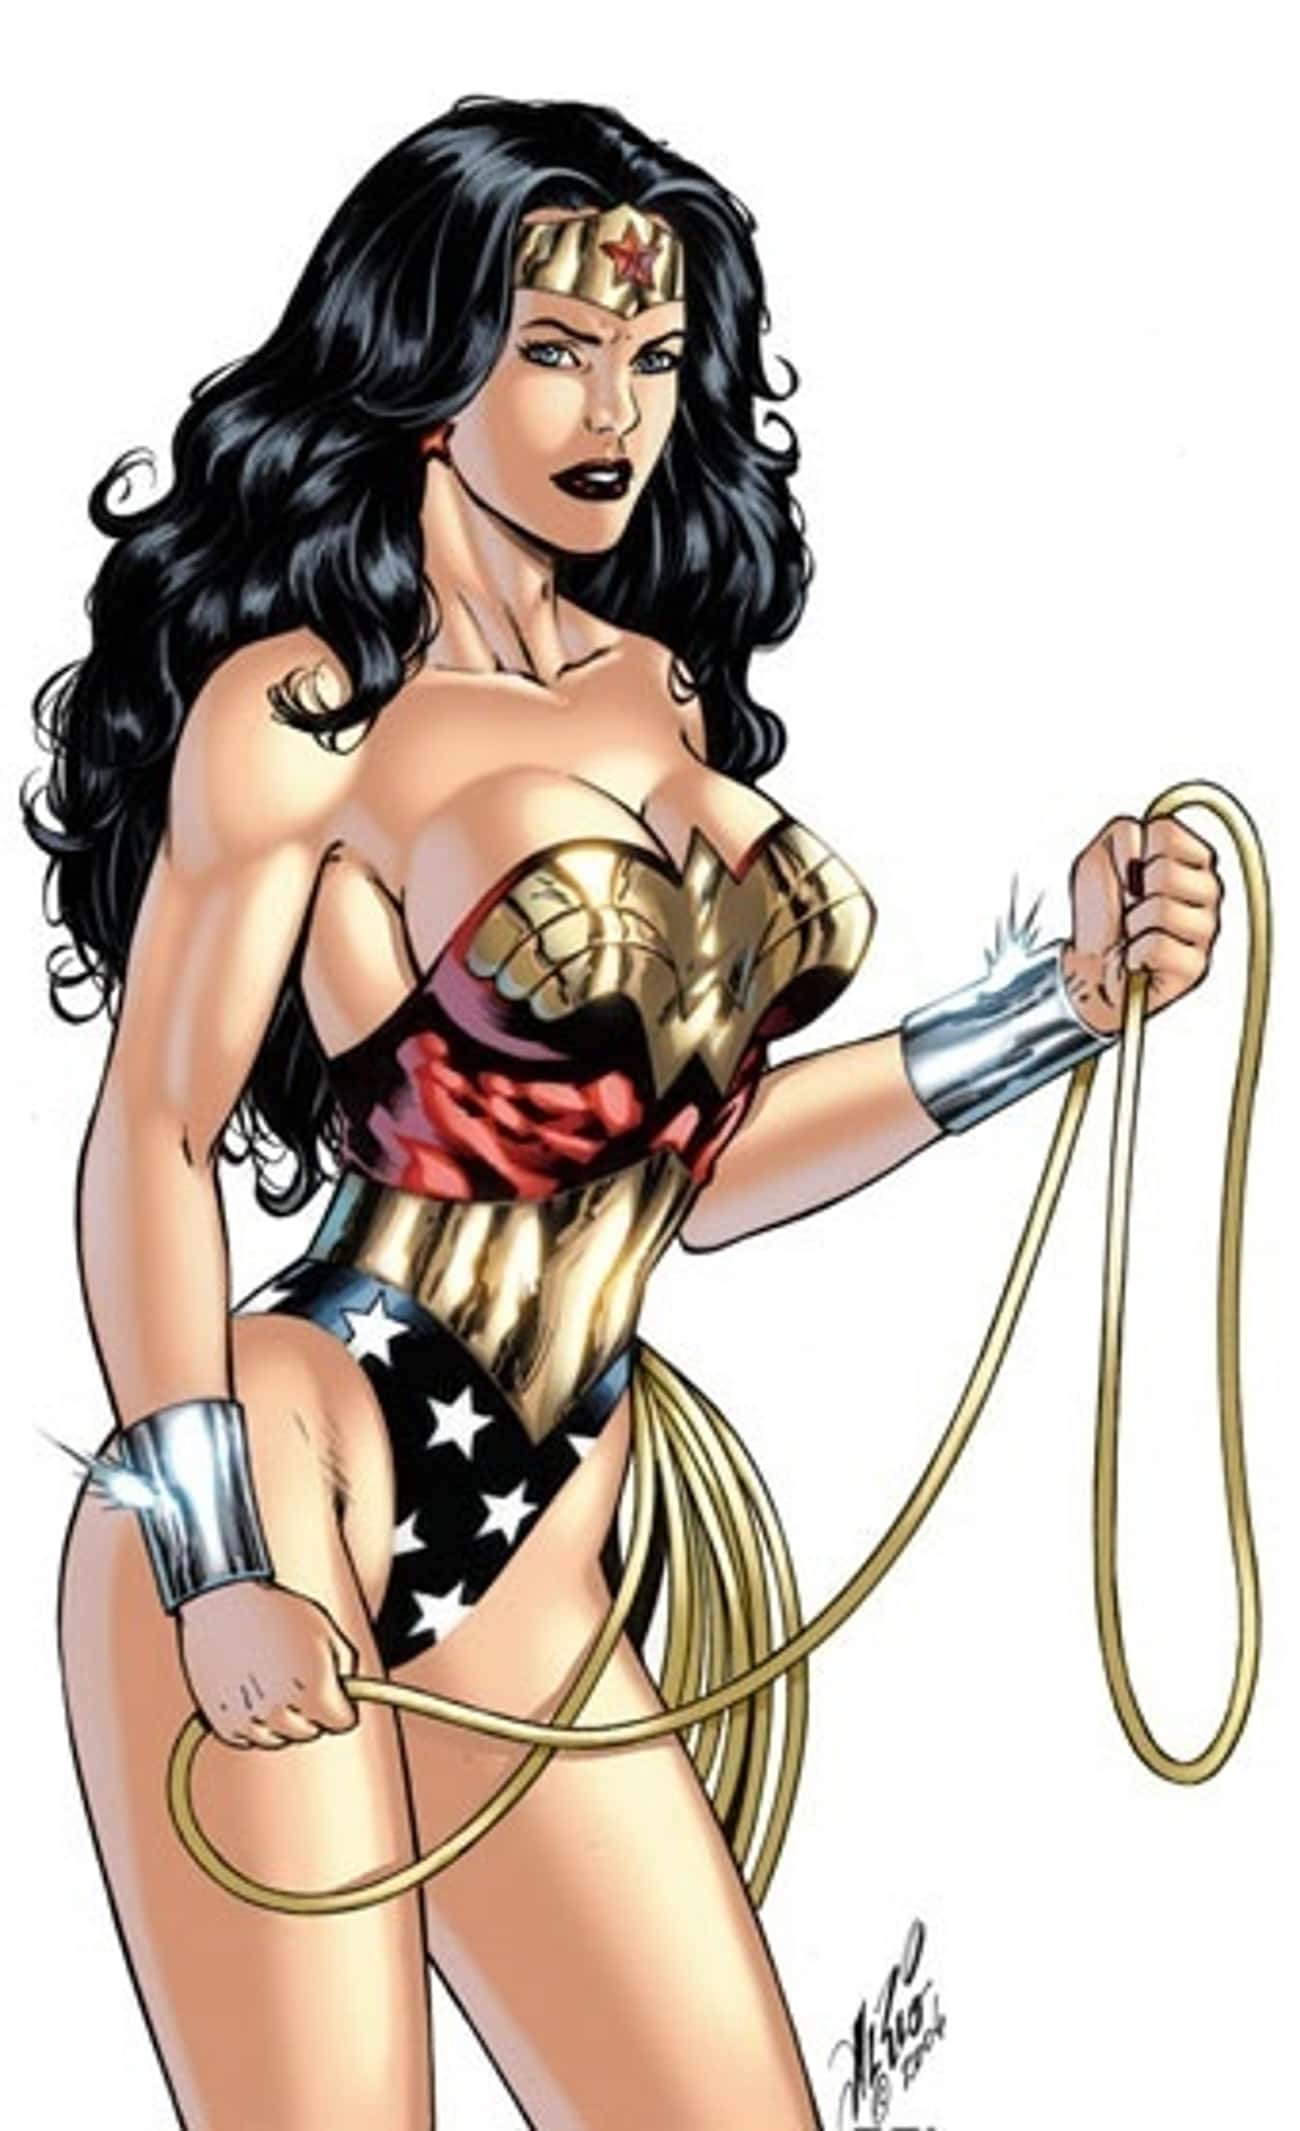 Wonder Woman in Original 80's Outfit